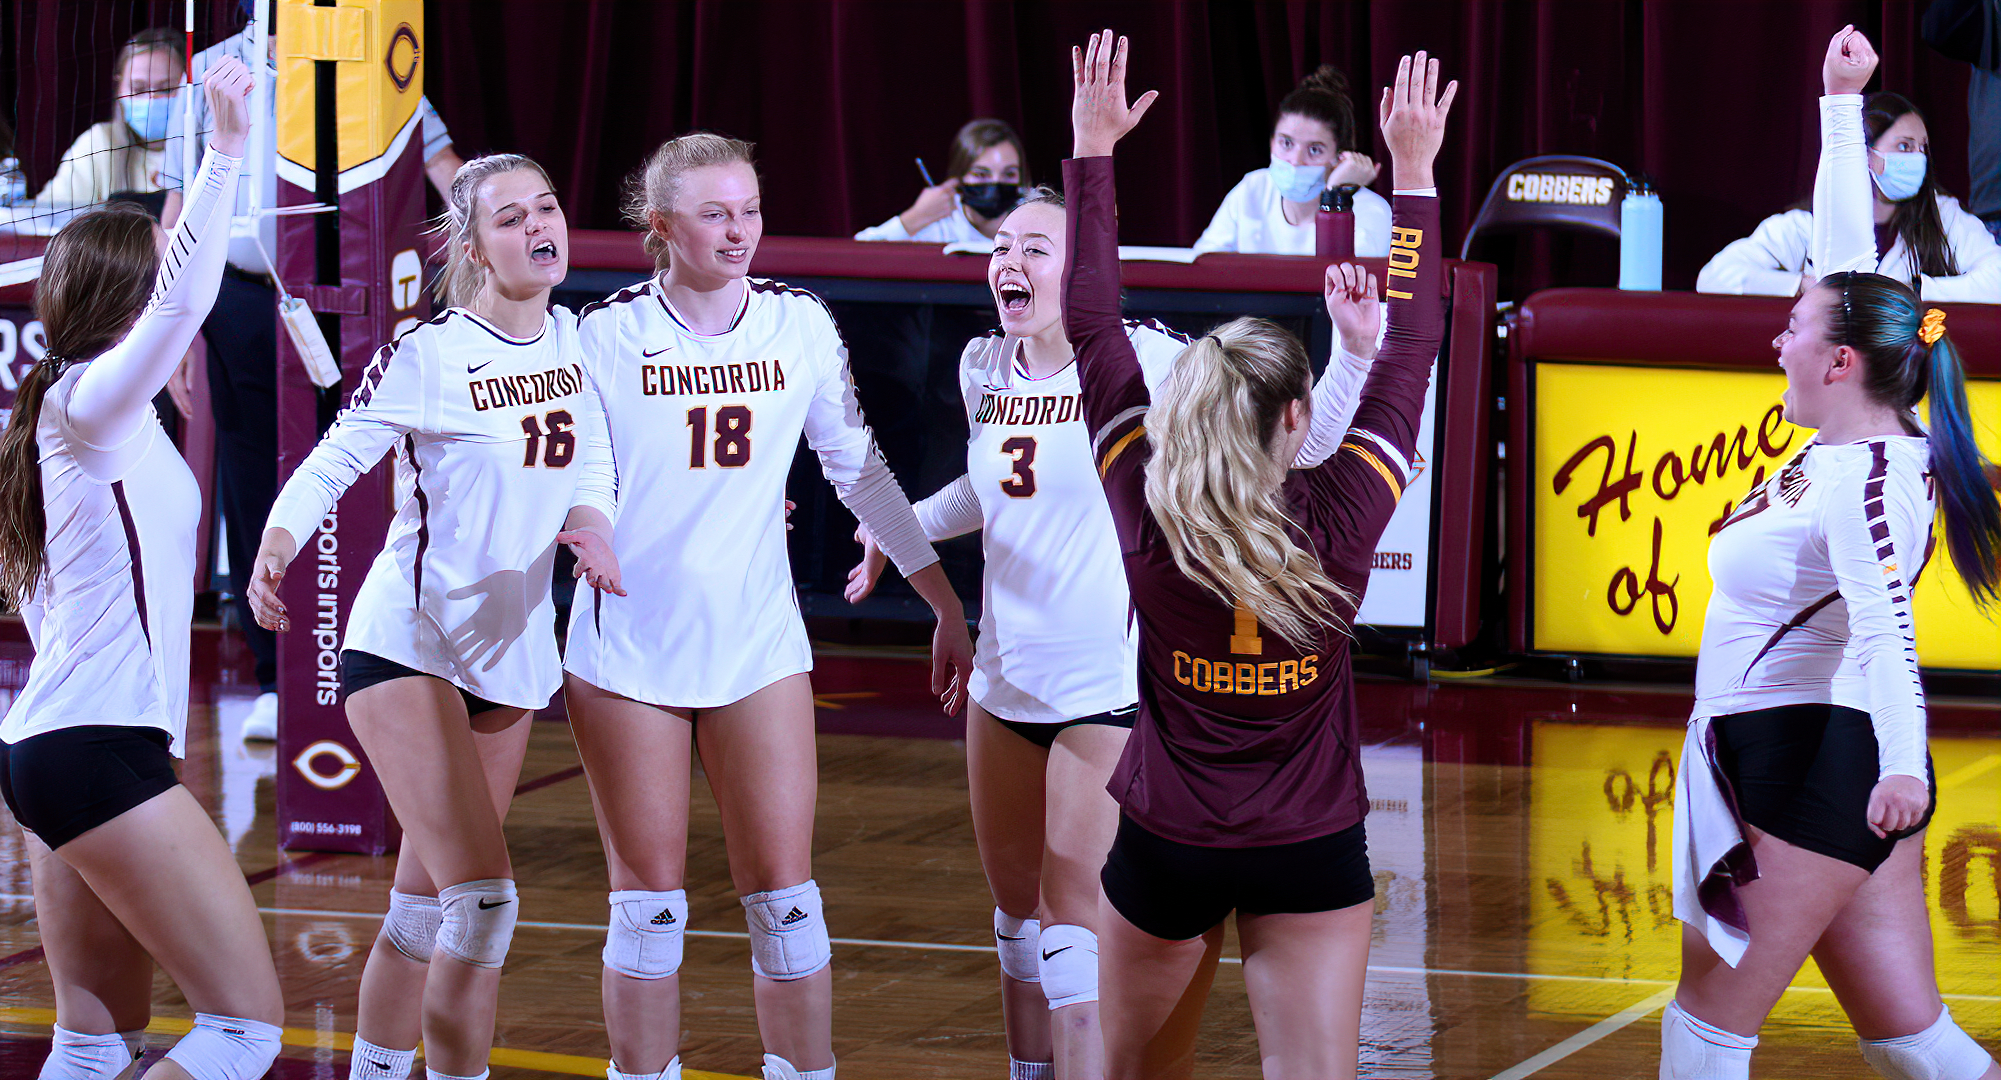 Concordia celebrates match point in their 3-1 win over St. Mary's.